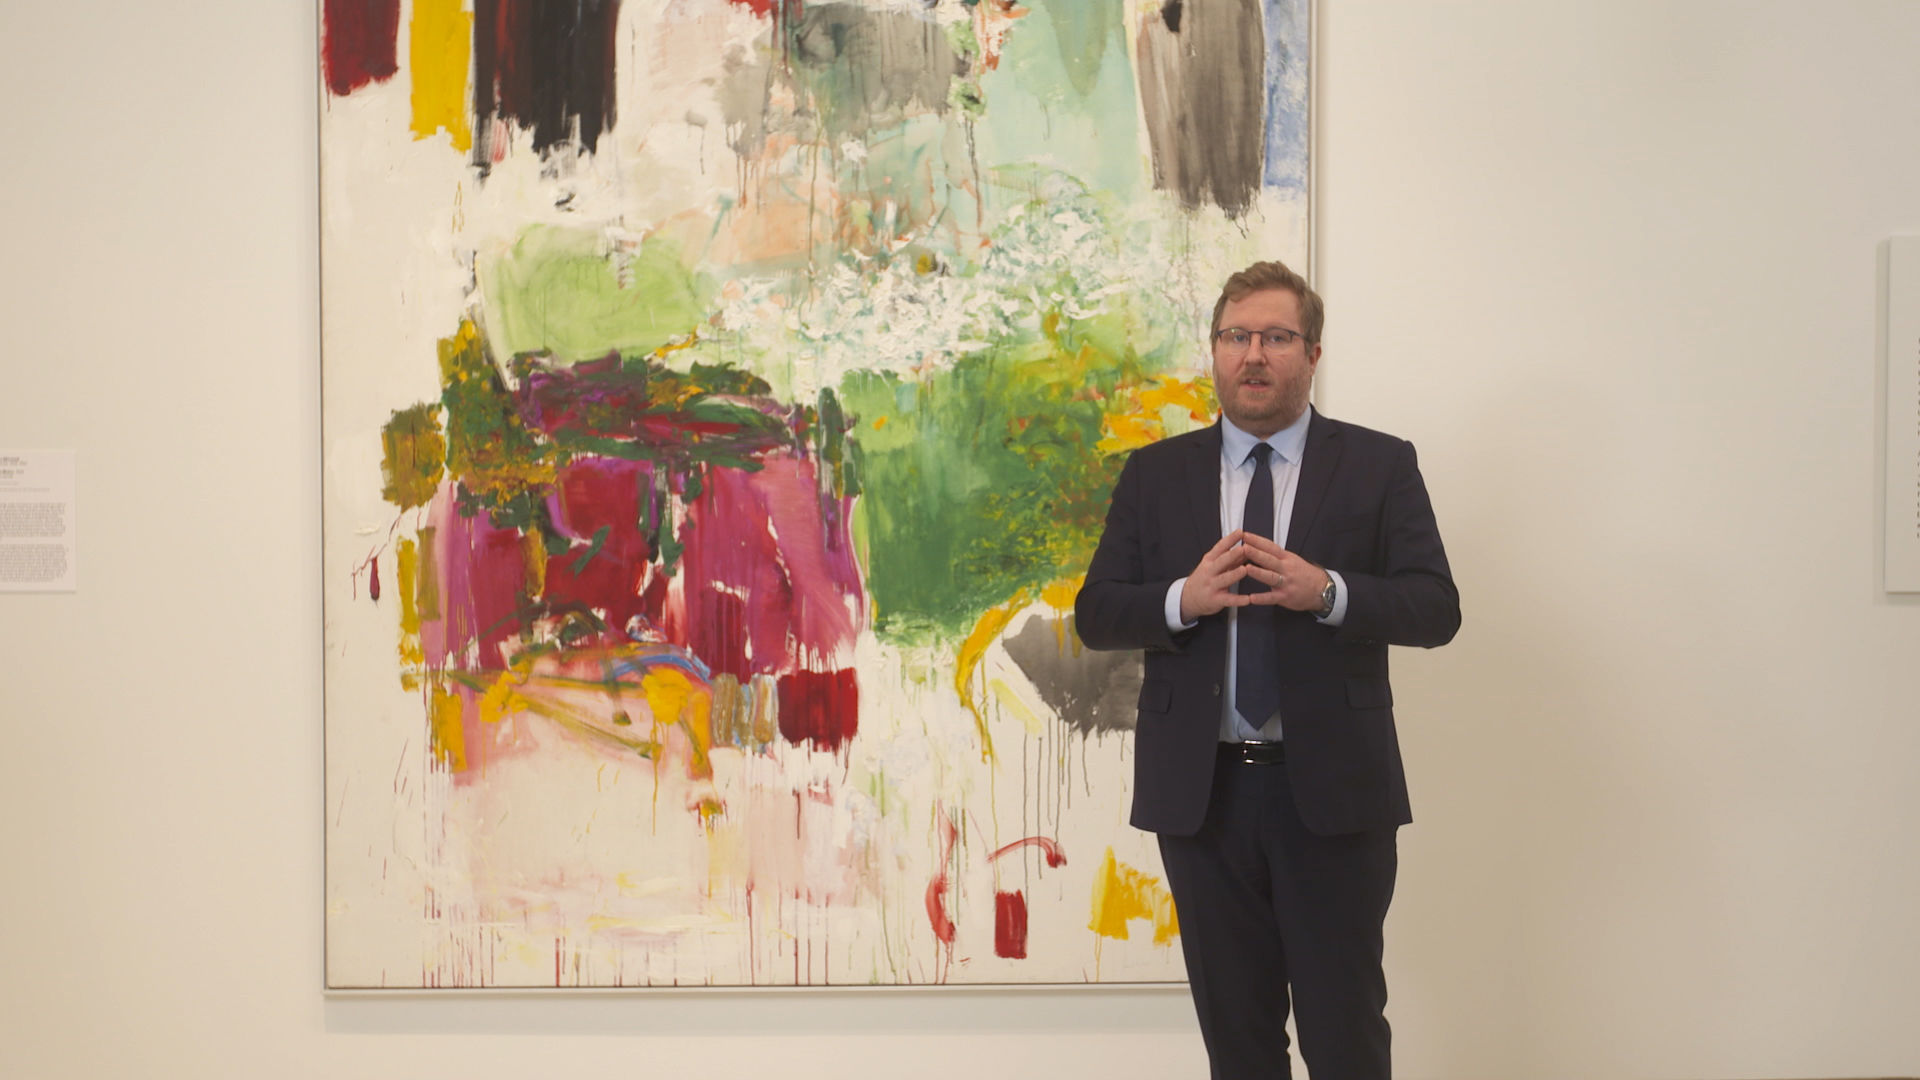 Joan Mitchell, Low Water, 1969, oil on canvas, 284.48 x 200.66 cm (Carnegie Museum of Art)